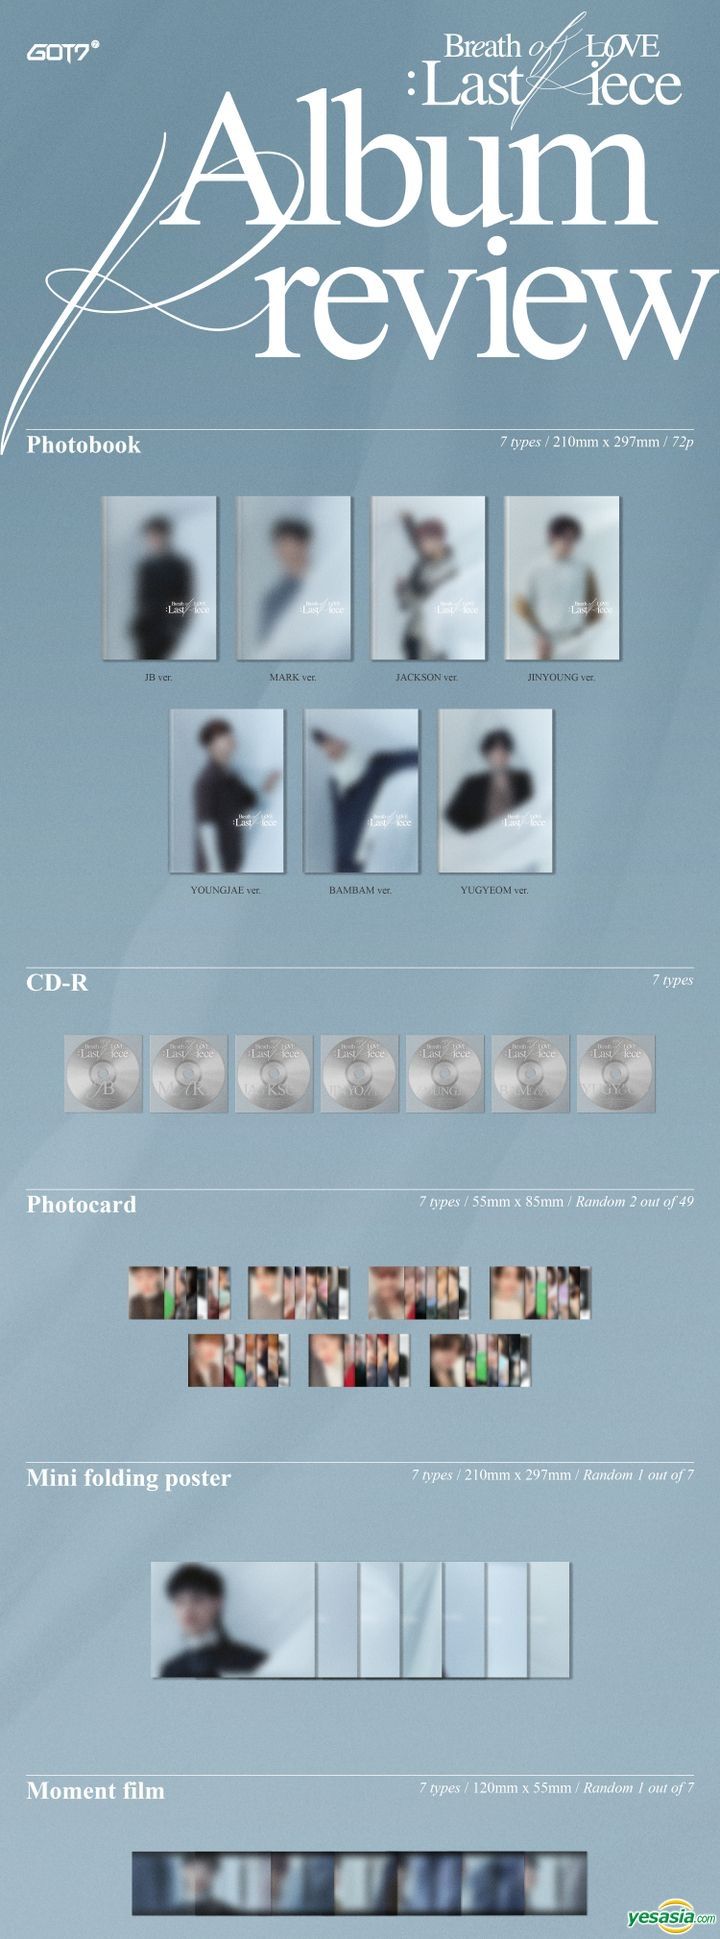 GOT7 Extra Decorative Stickers CD+Photobook+Folded Poster+Others with Tracking Breath of Love : Last Piece Pre Order Photocards Yugyeom Ver. 4th Album 